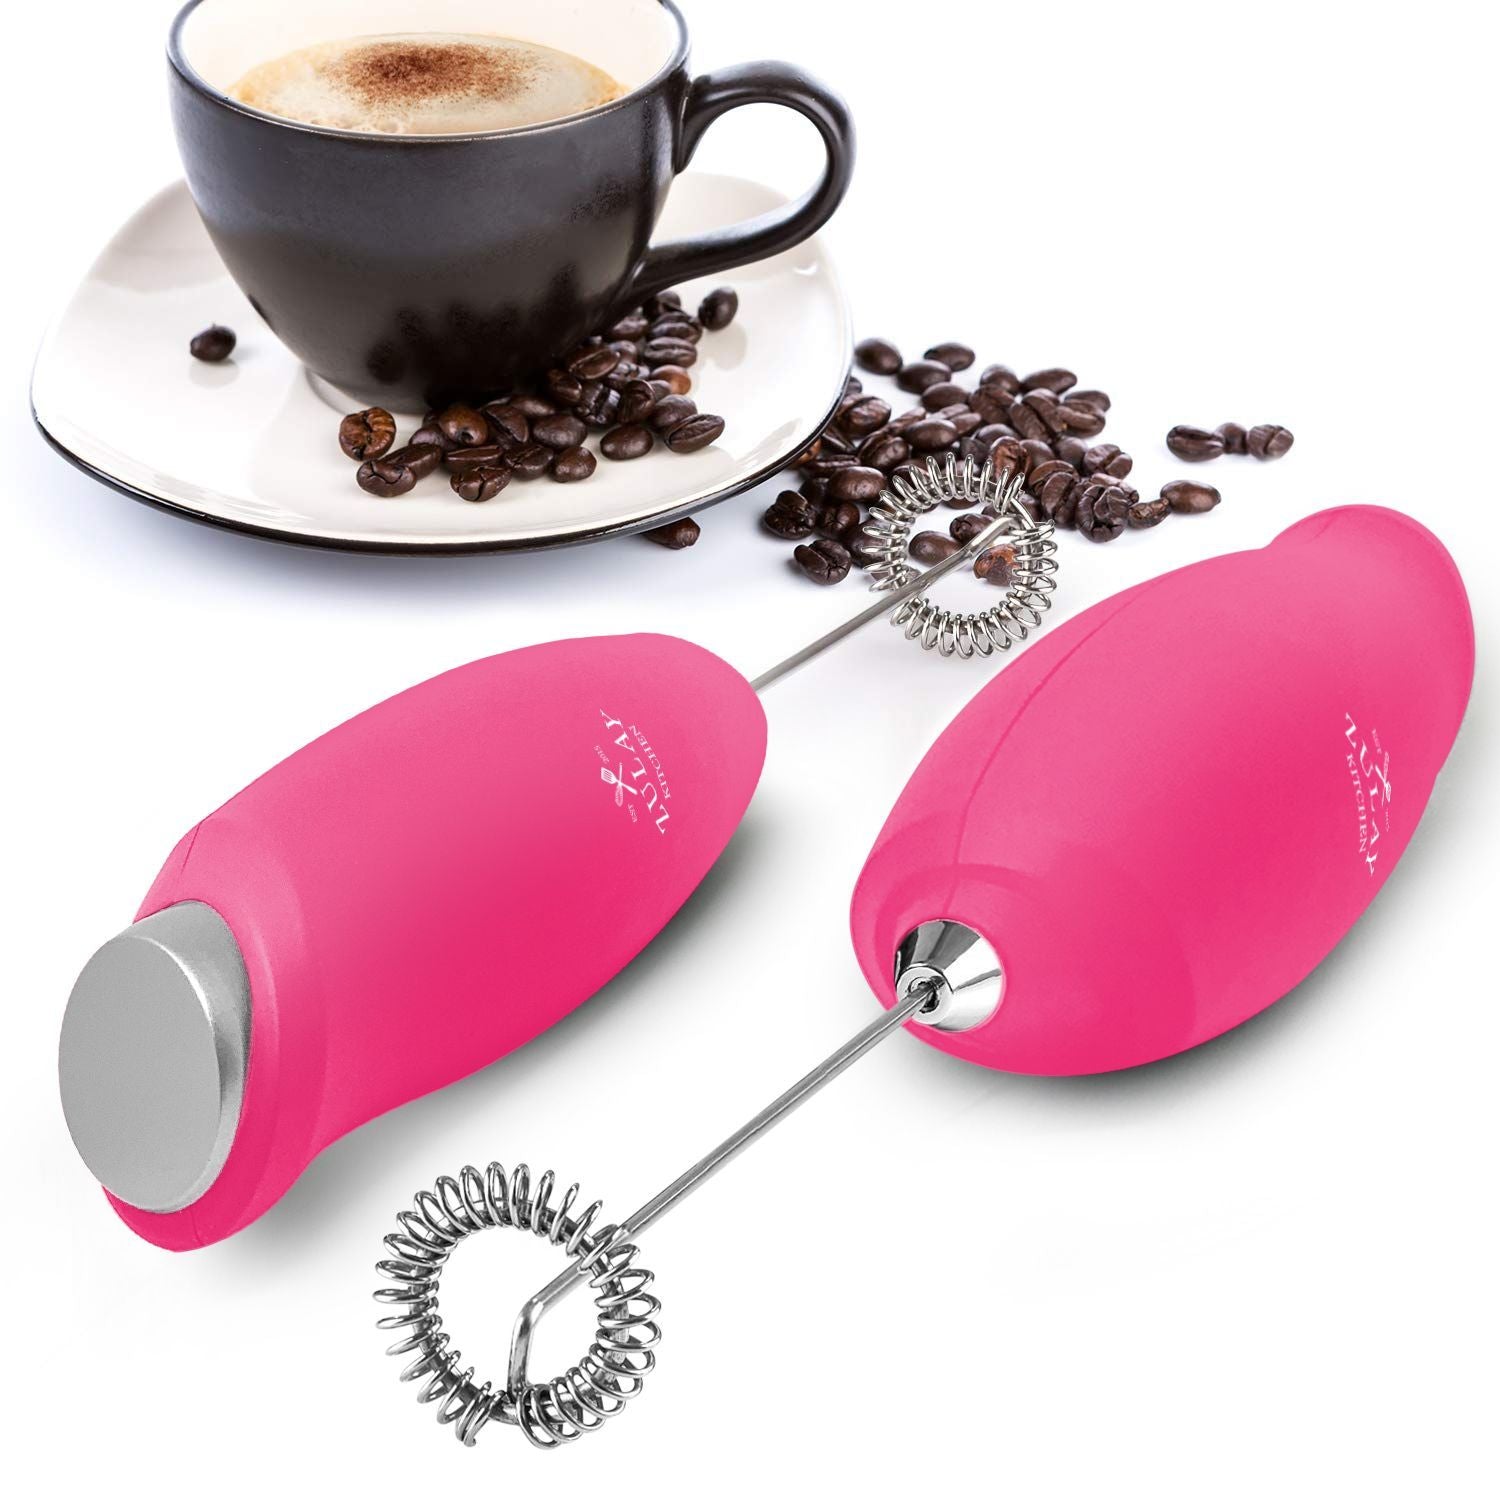 Zulay Kitchen Classic Milk Frother With Stand - Pop Pink/Teal, 1